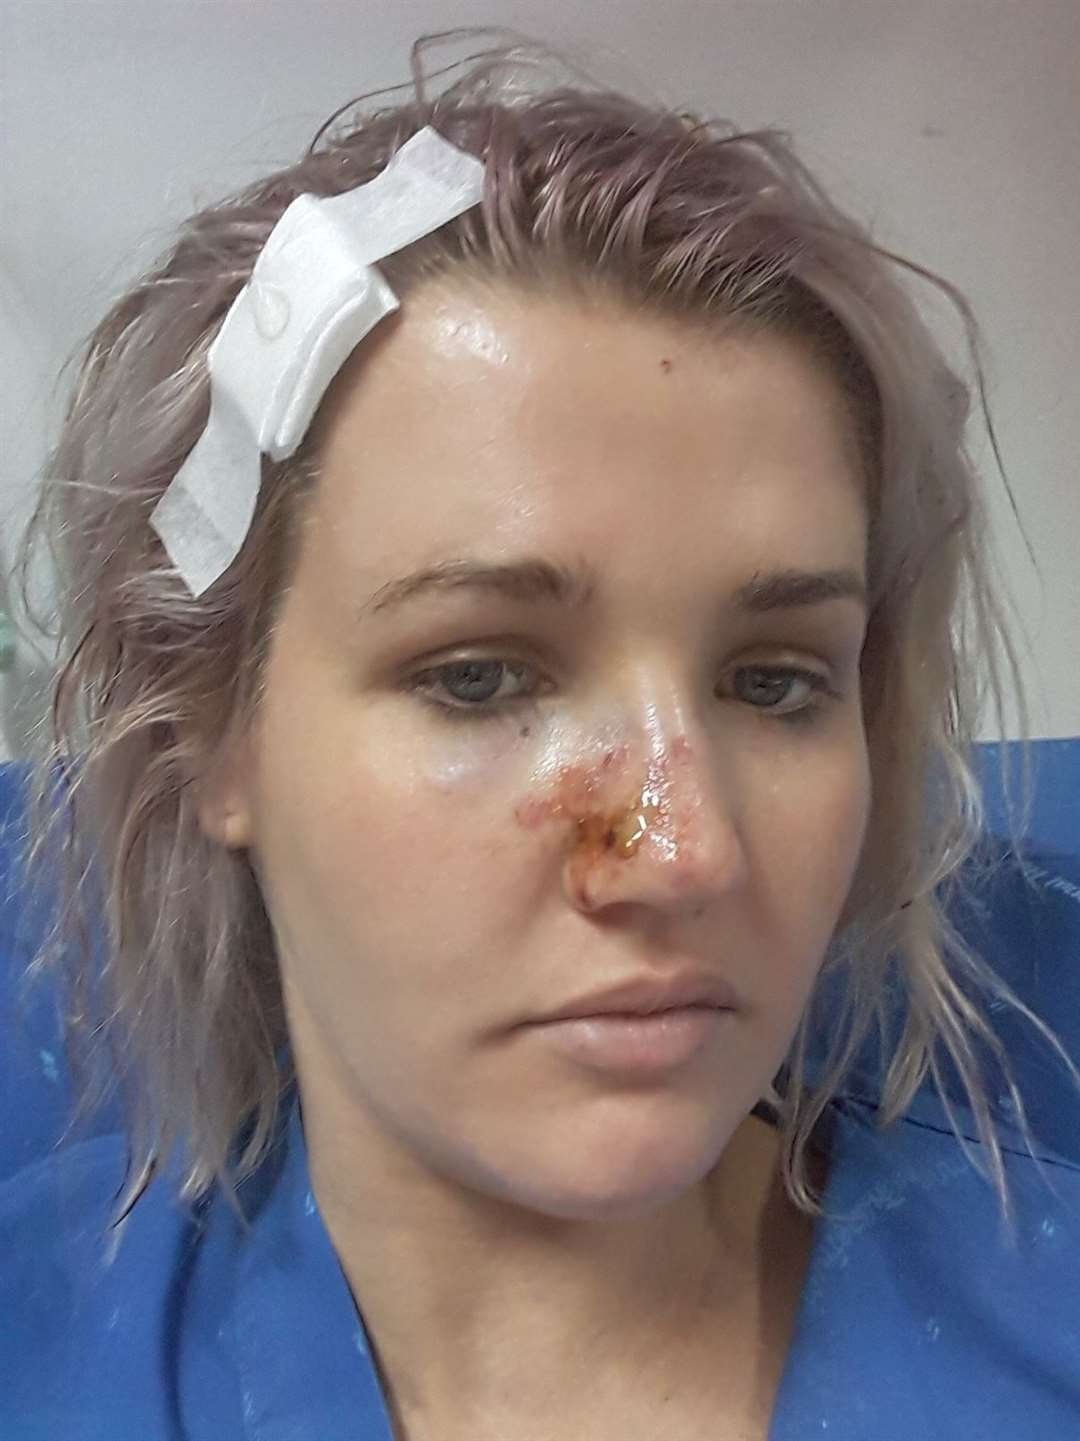 Abi Harrison faces a £12,000 medical bill as her insurance did not cover emergency surgery (13714760)